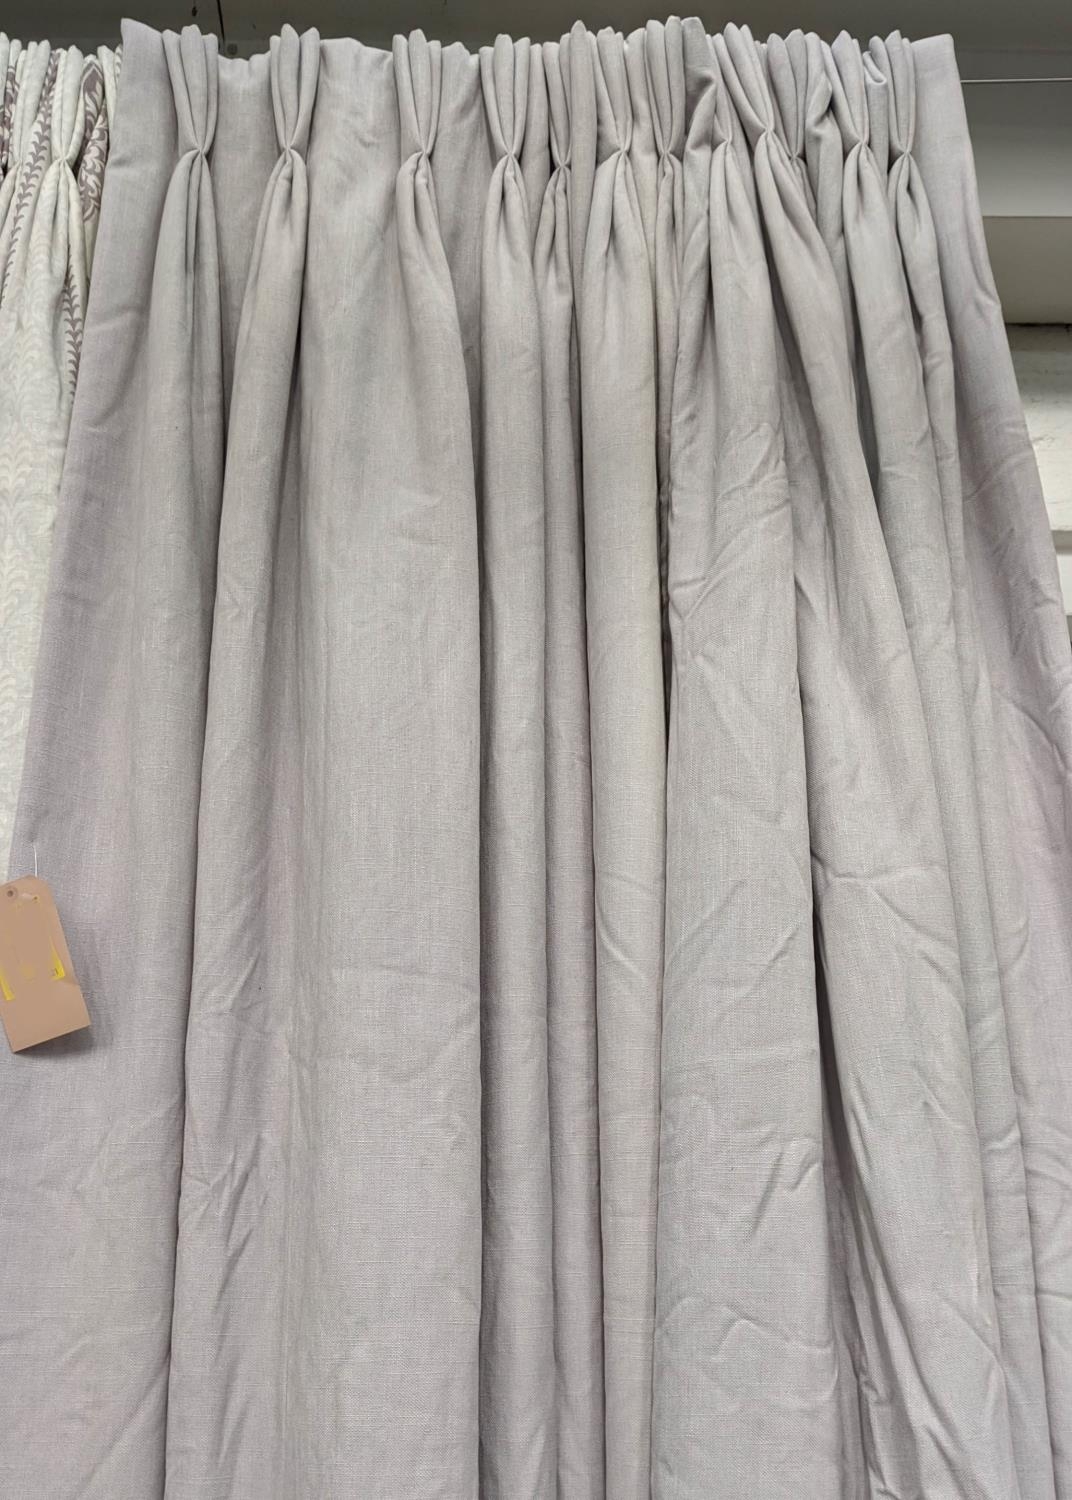 CURTAINS, a pair, lined and interlined plain woven fabric, 80cm x 230cm drop. (2)